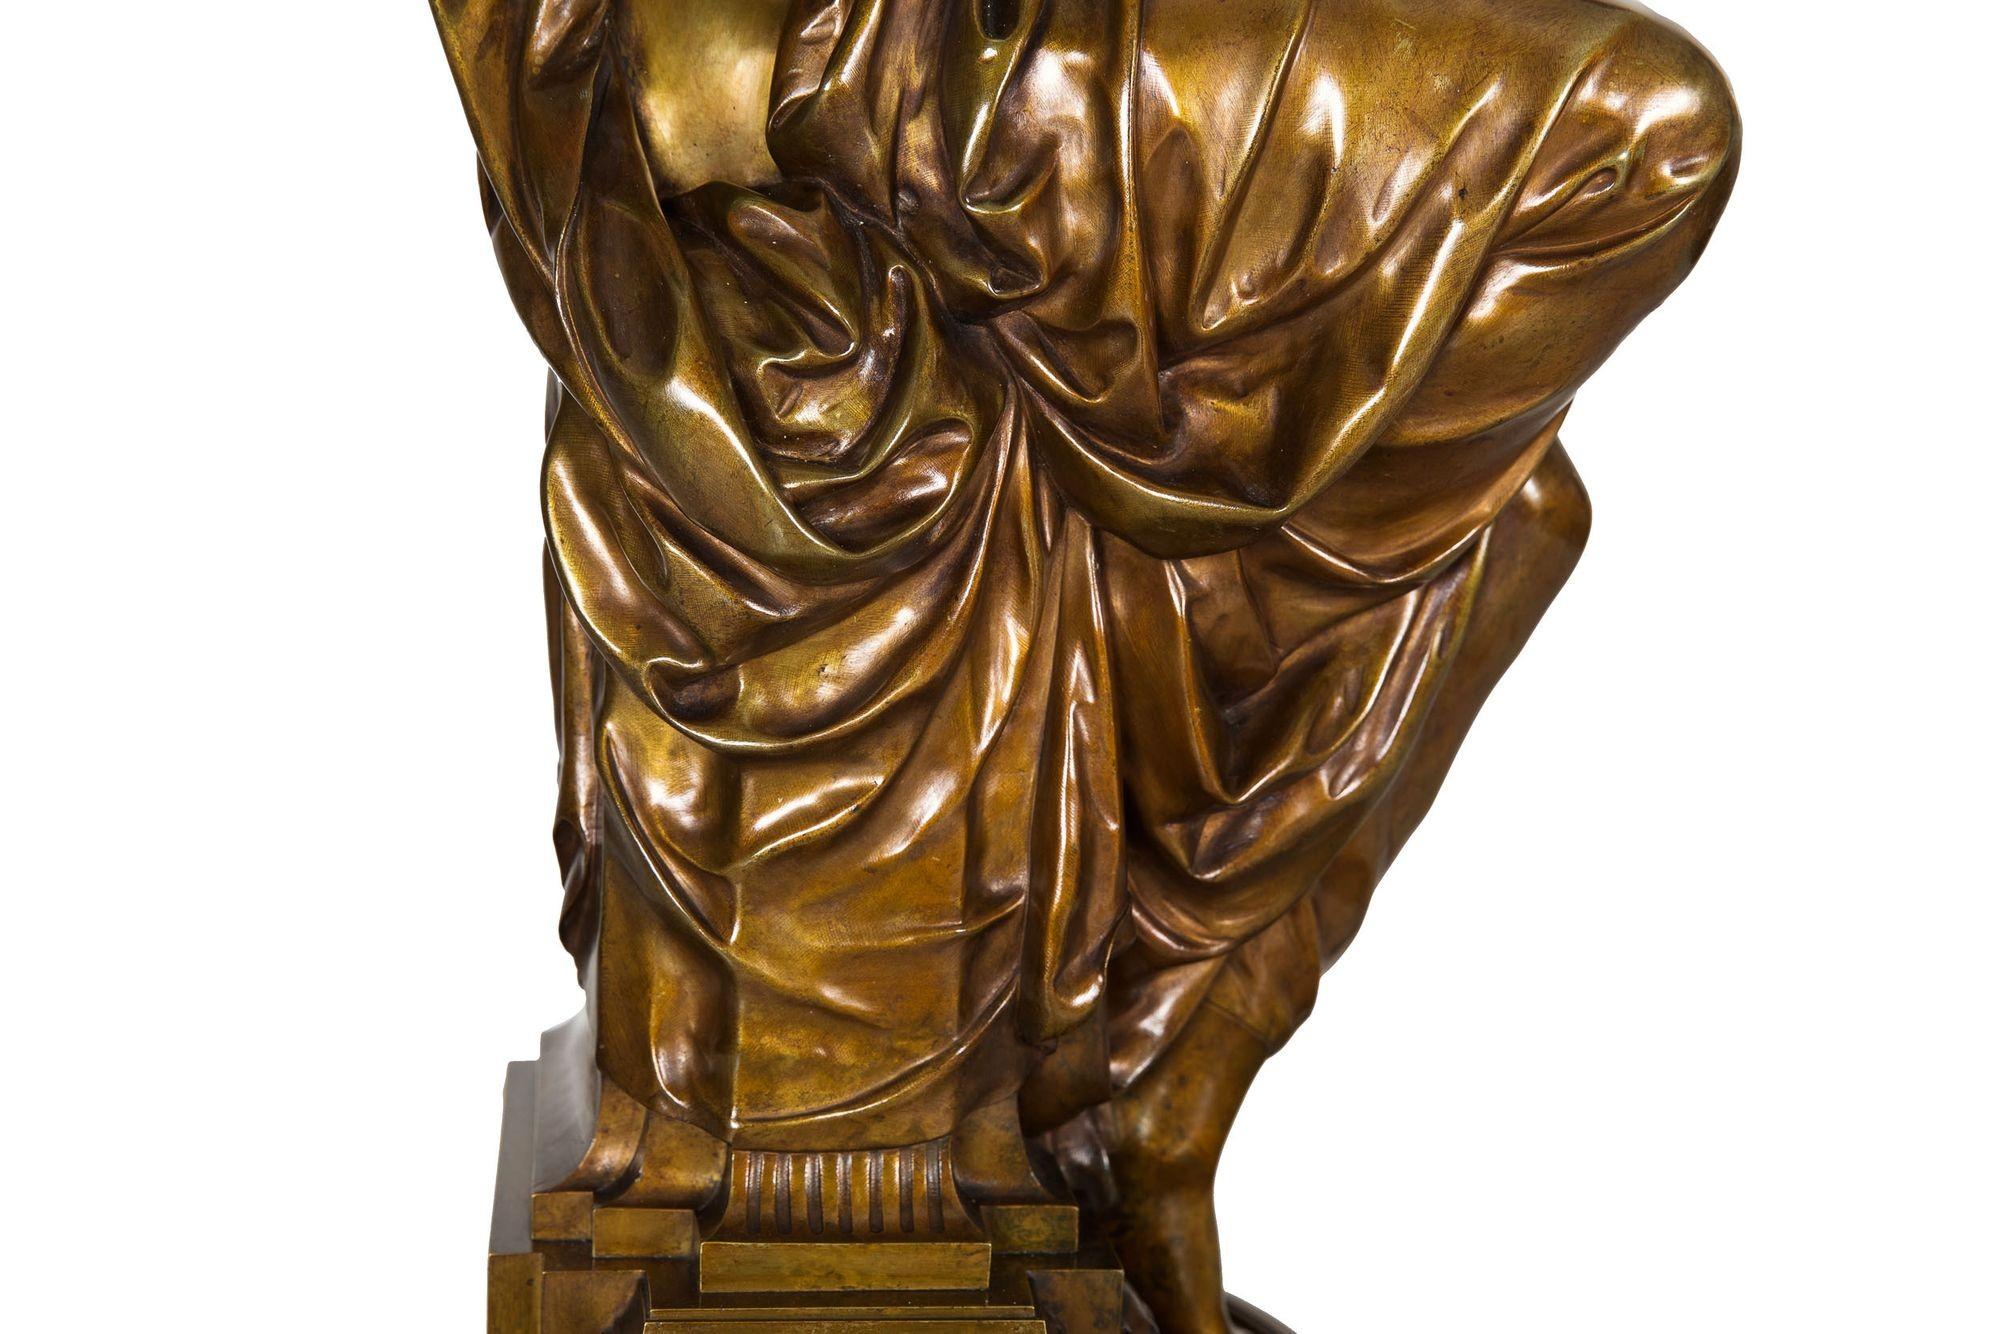 French Antique Bronze Sculpture “Seated Woman” by Etienne-Henri Dumaige, c.1880 For Sale 10